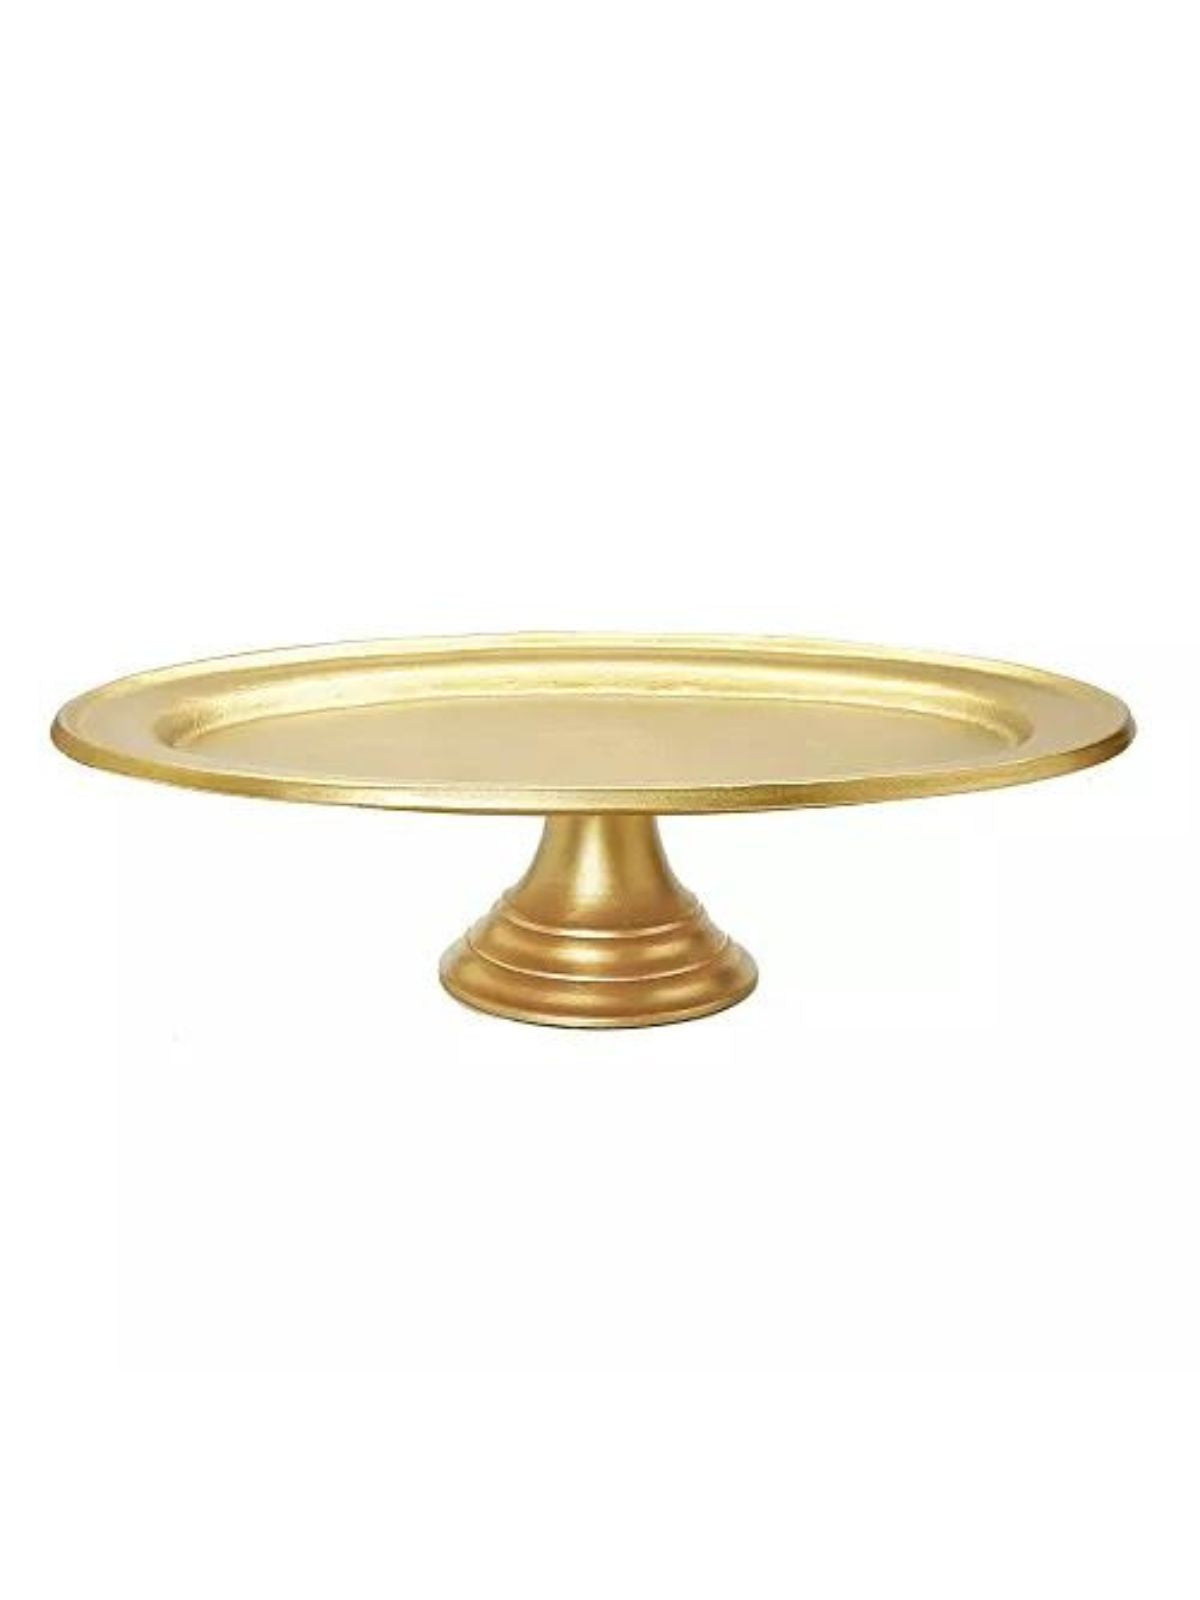 This 15D gold cake plate is made out of quality stainless steel, Sold by KYA Home Decor